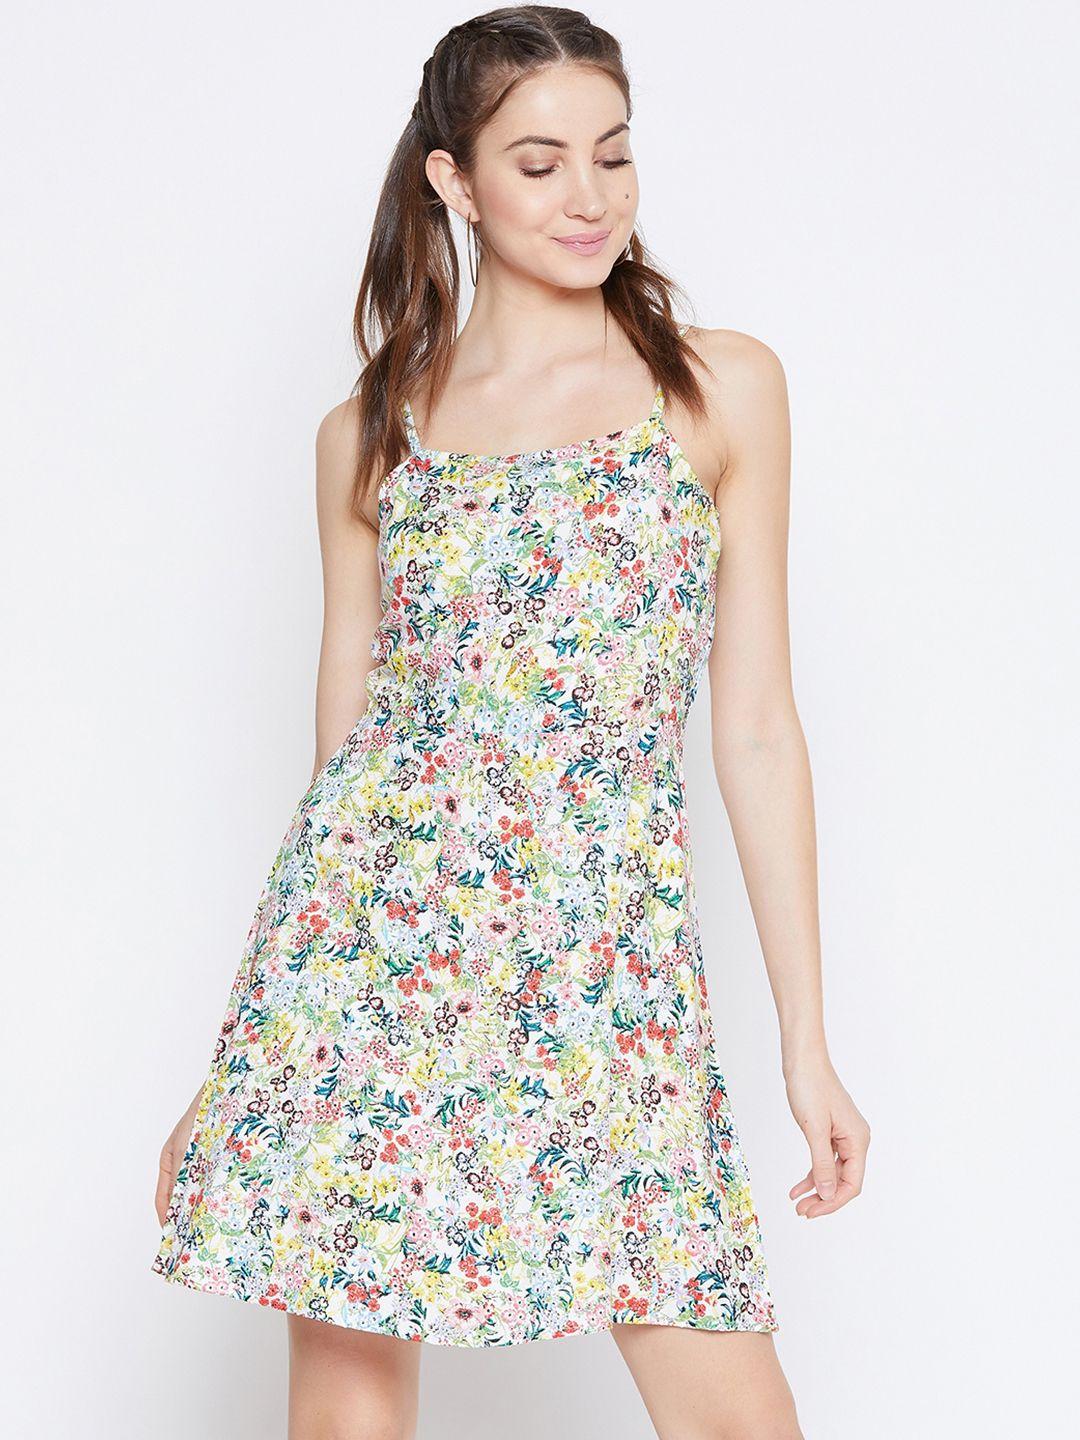 Berrylush Multicoloured Floral Printed Fit and Flare Dress